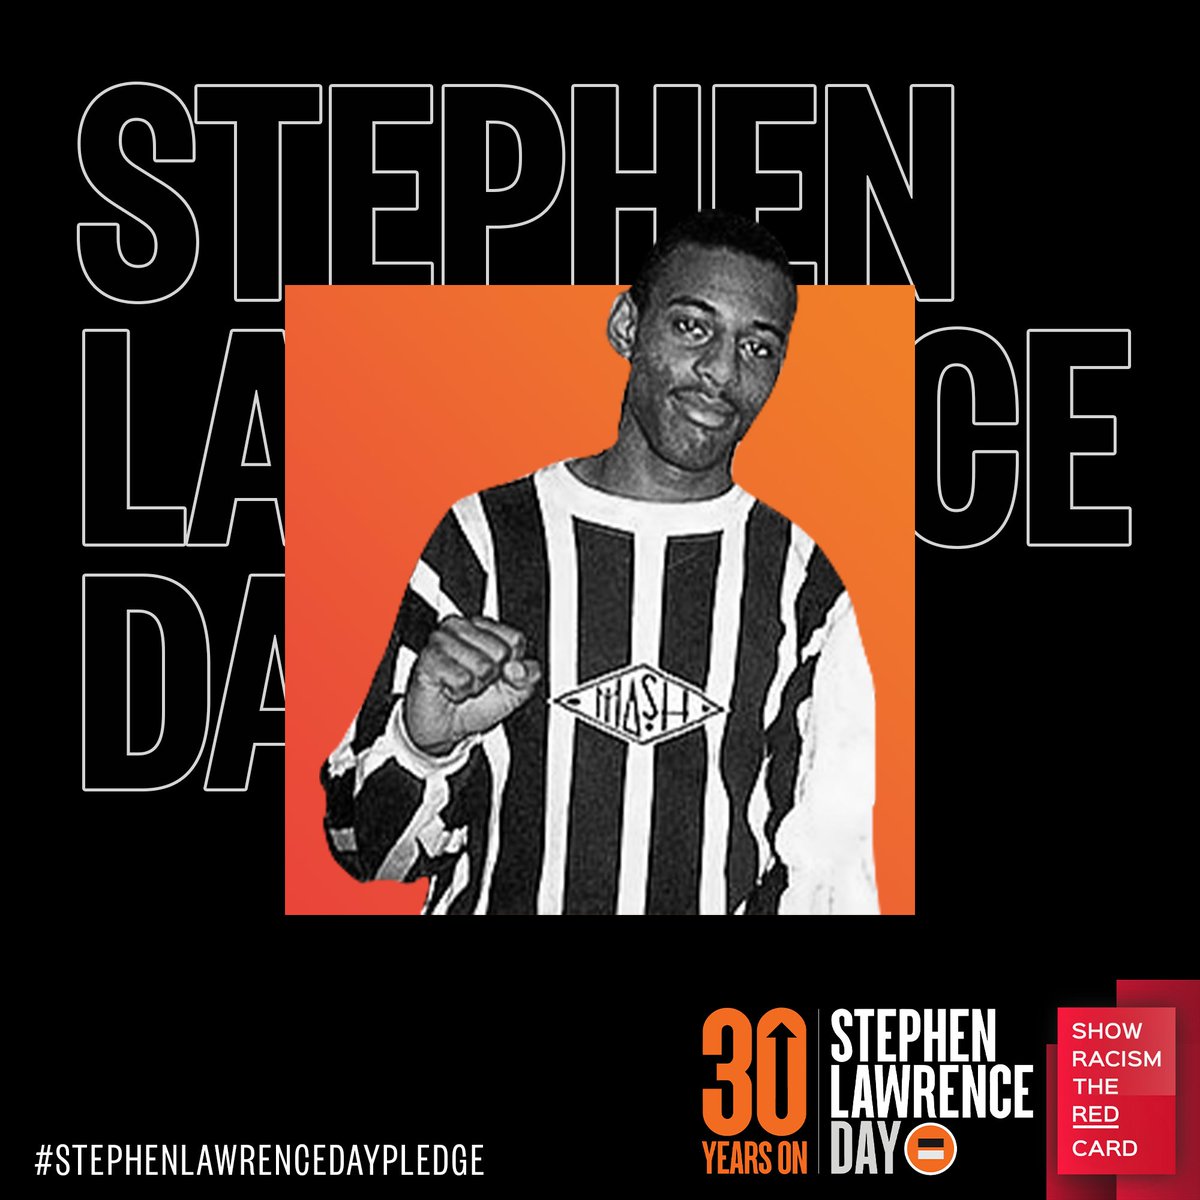 I will forever be enraged by the racist murder of Stephen Lawrence, I write about #racism I challenge #racism I educate young people to recognise #racism in its many guises #StephenLawrenceDayPledge #becauseofstephen #30yearson  it still feels raw to me #StephenLawrenceDay